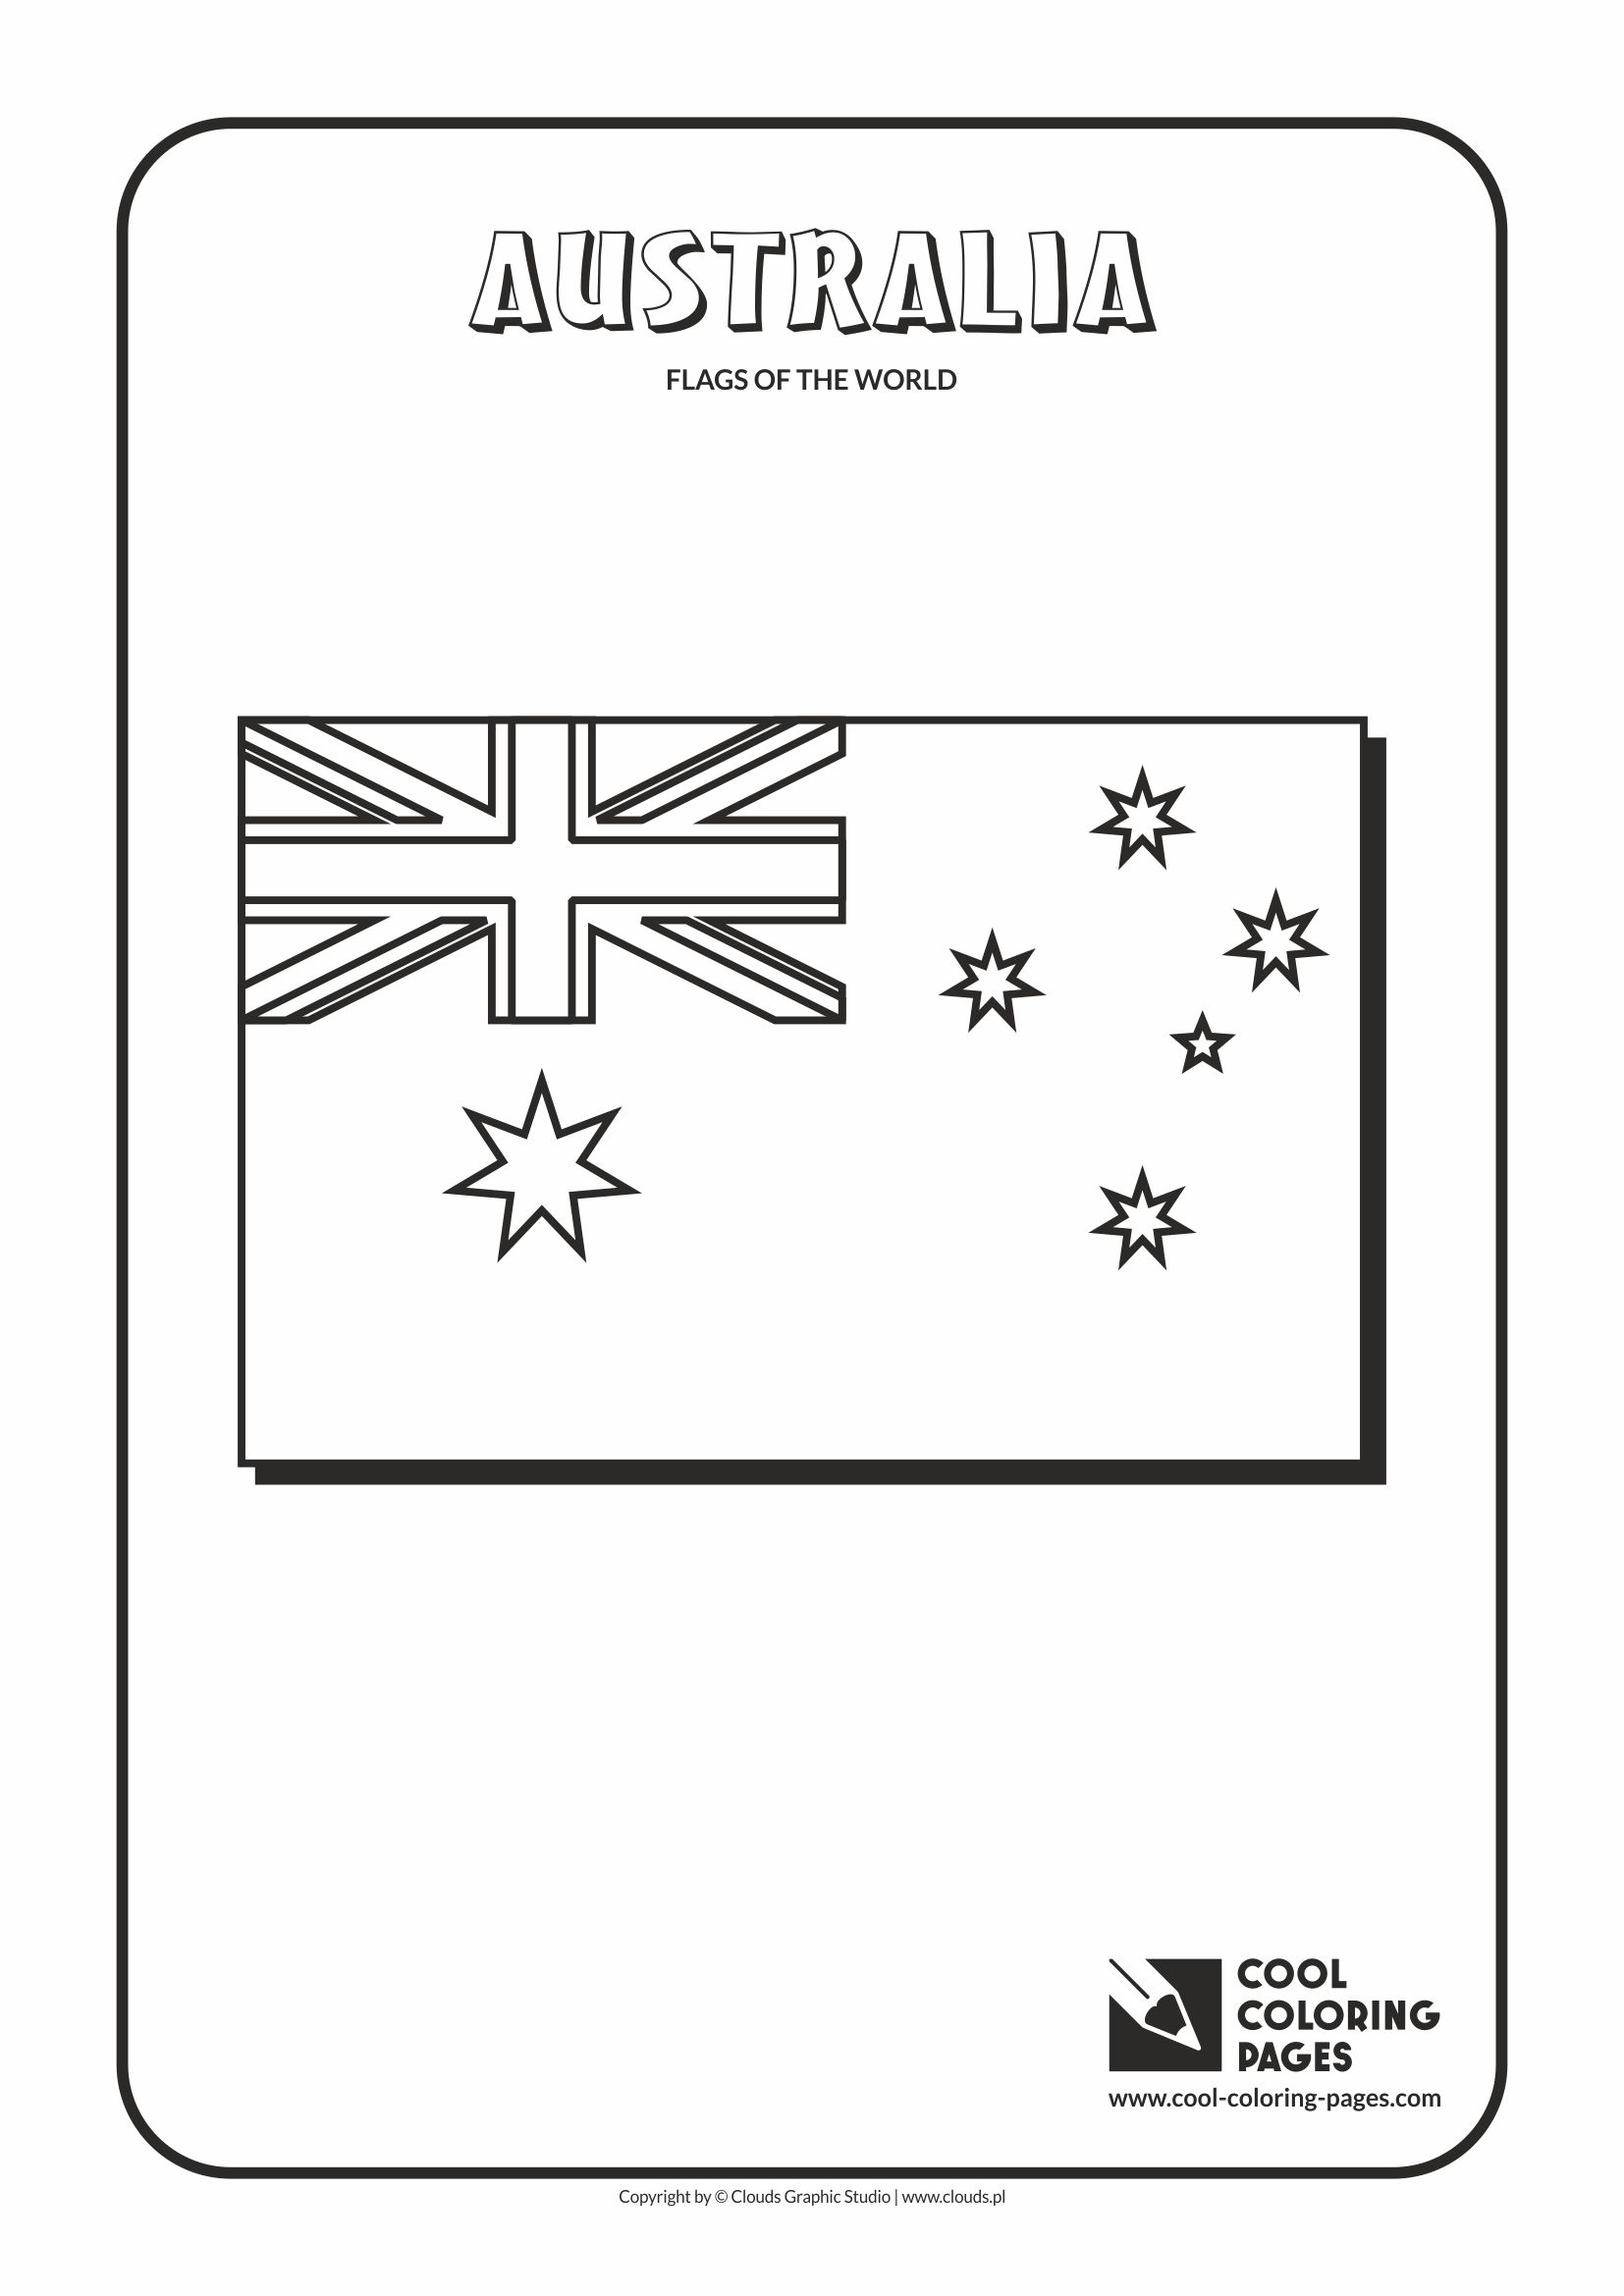 Cool Coloring Pages Flags of the world Cool Coloring